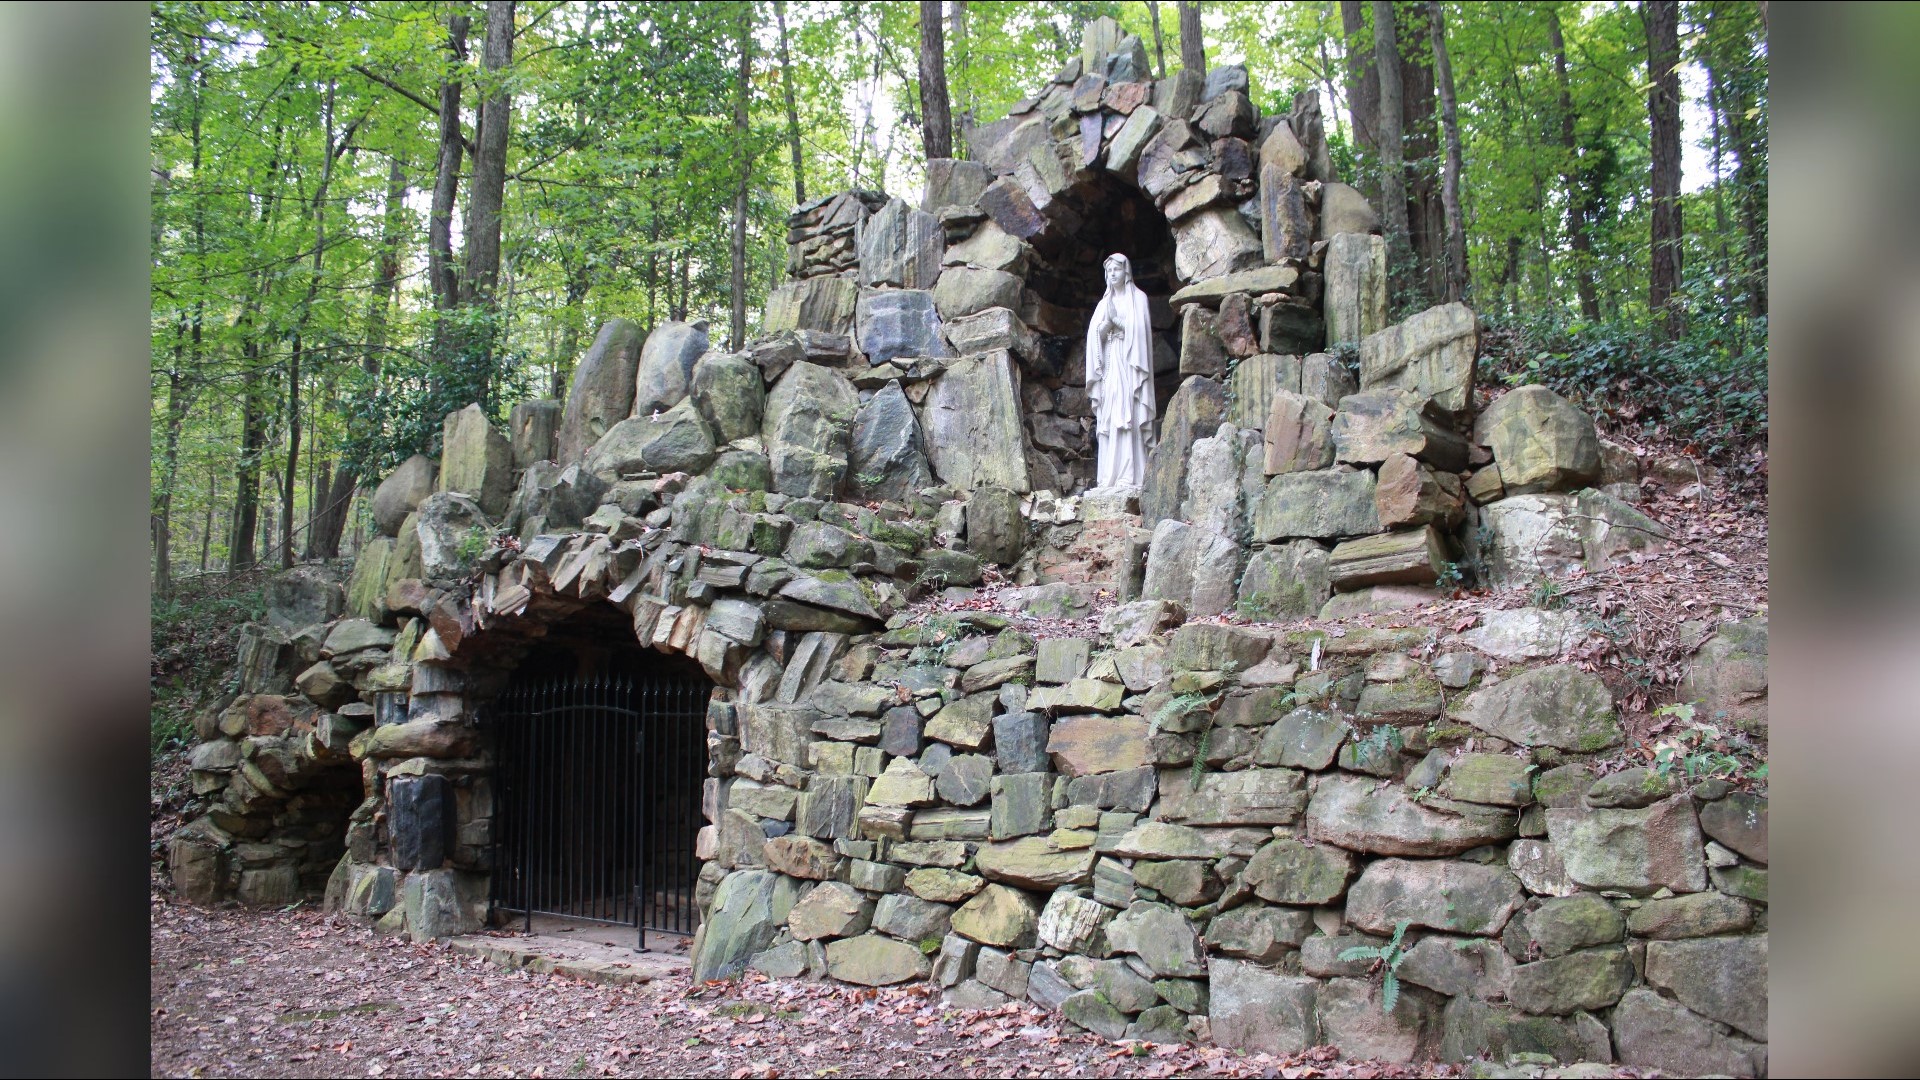 The Grotto off of Forest Hill Road in Macon was used as a place for retreat and recreation for the students of St. Stanislaus College in the early 1900s.